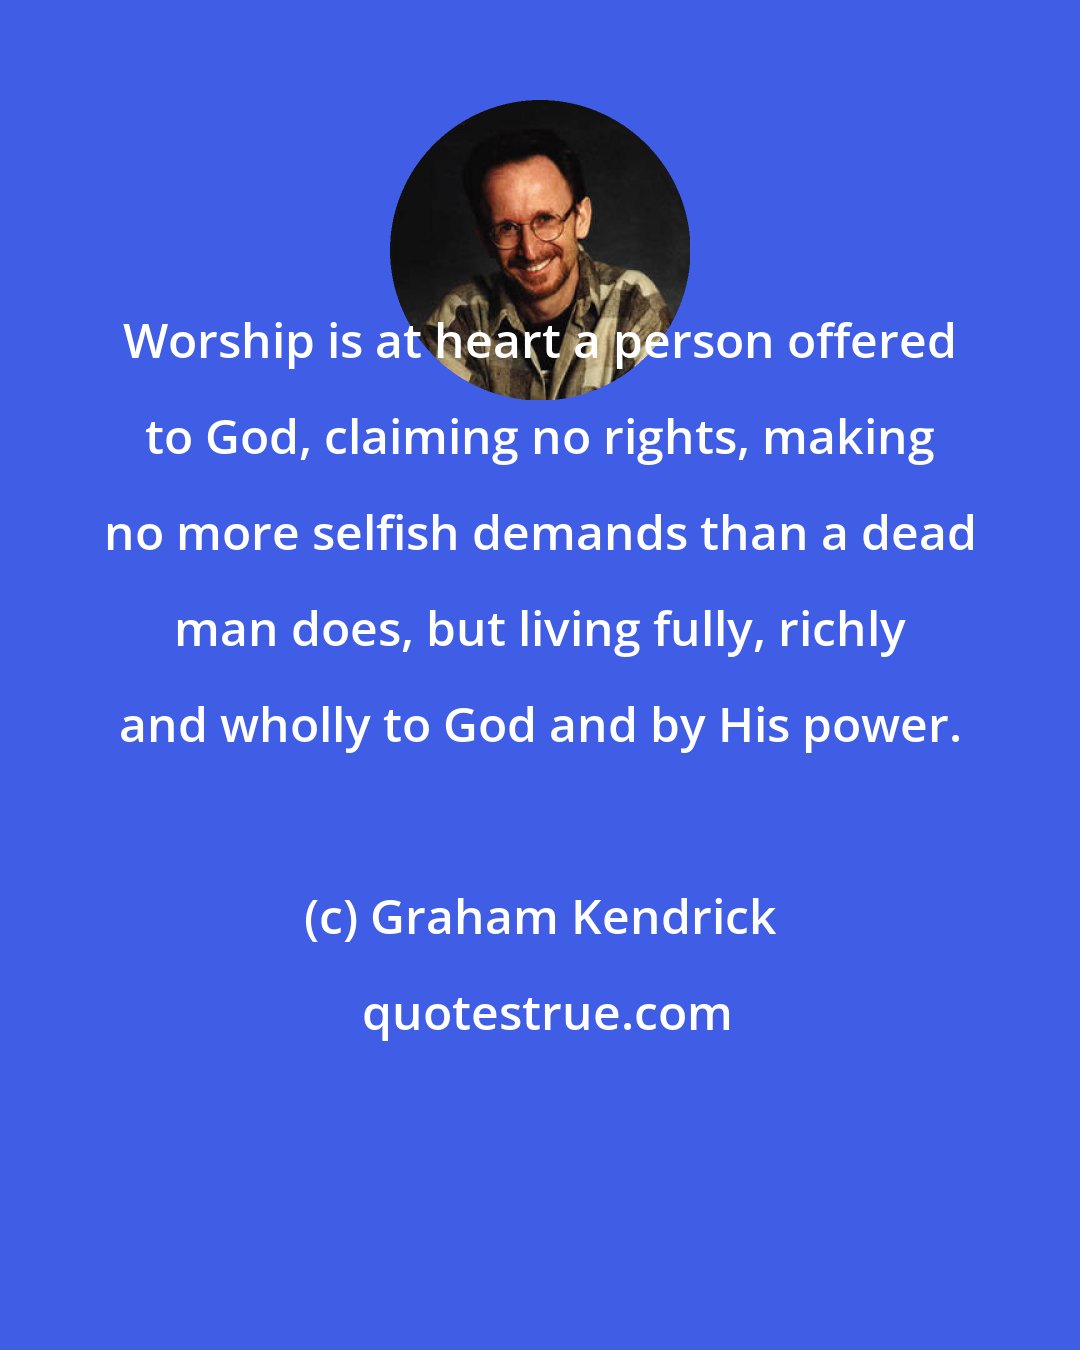 Graham Kendrick: Worship is at heart a person offered to God, claiming no rights, making no more selfish demands than a dead man does, but living fully, richly and wholly to God and by His power.